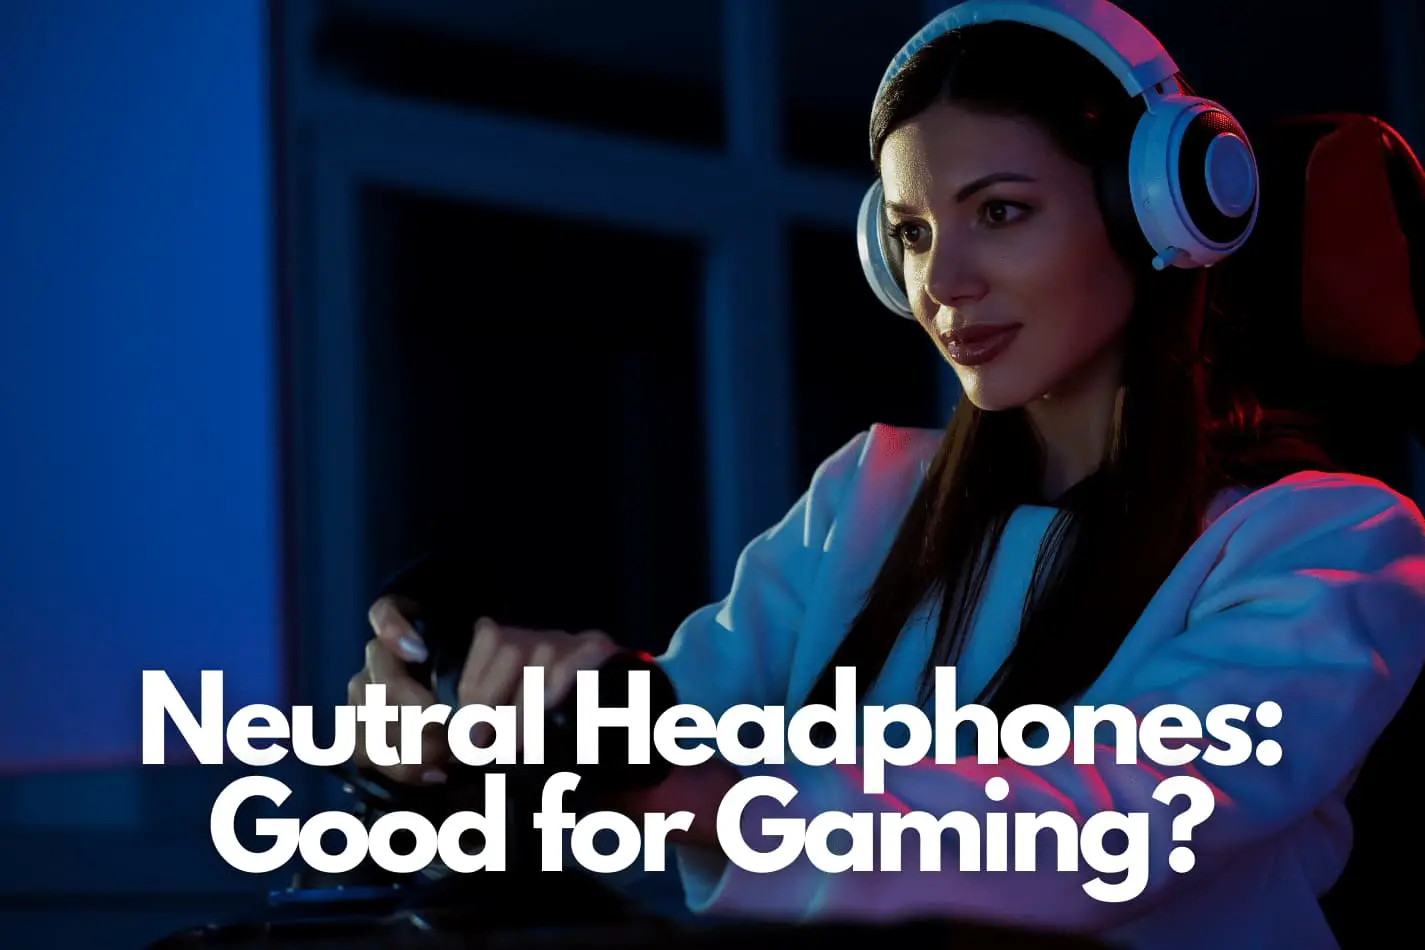 Why Neutral Headphones Should Be Avoided for Gaming Use